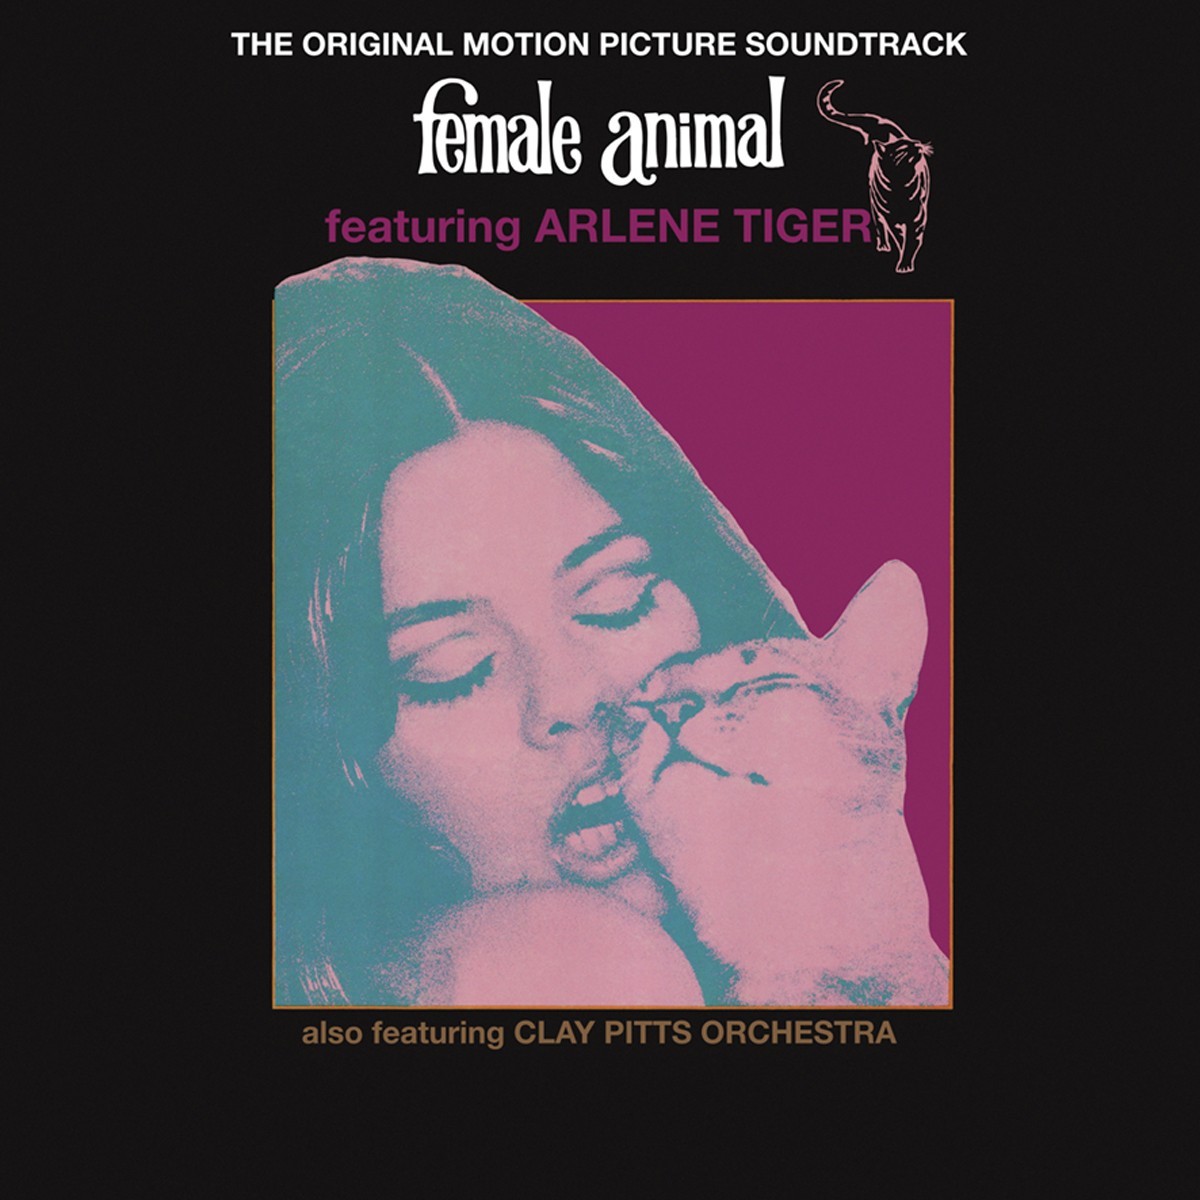 Arlene Tiger & The Clay Pitts Orchestra - Female Animal: The Original Soundtrack